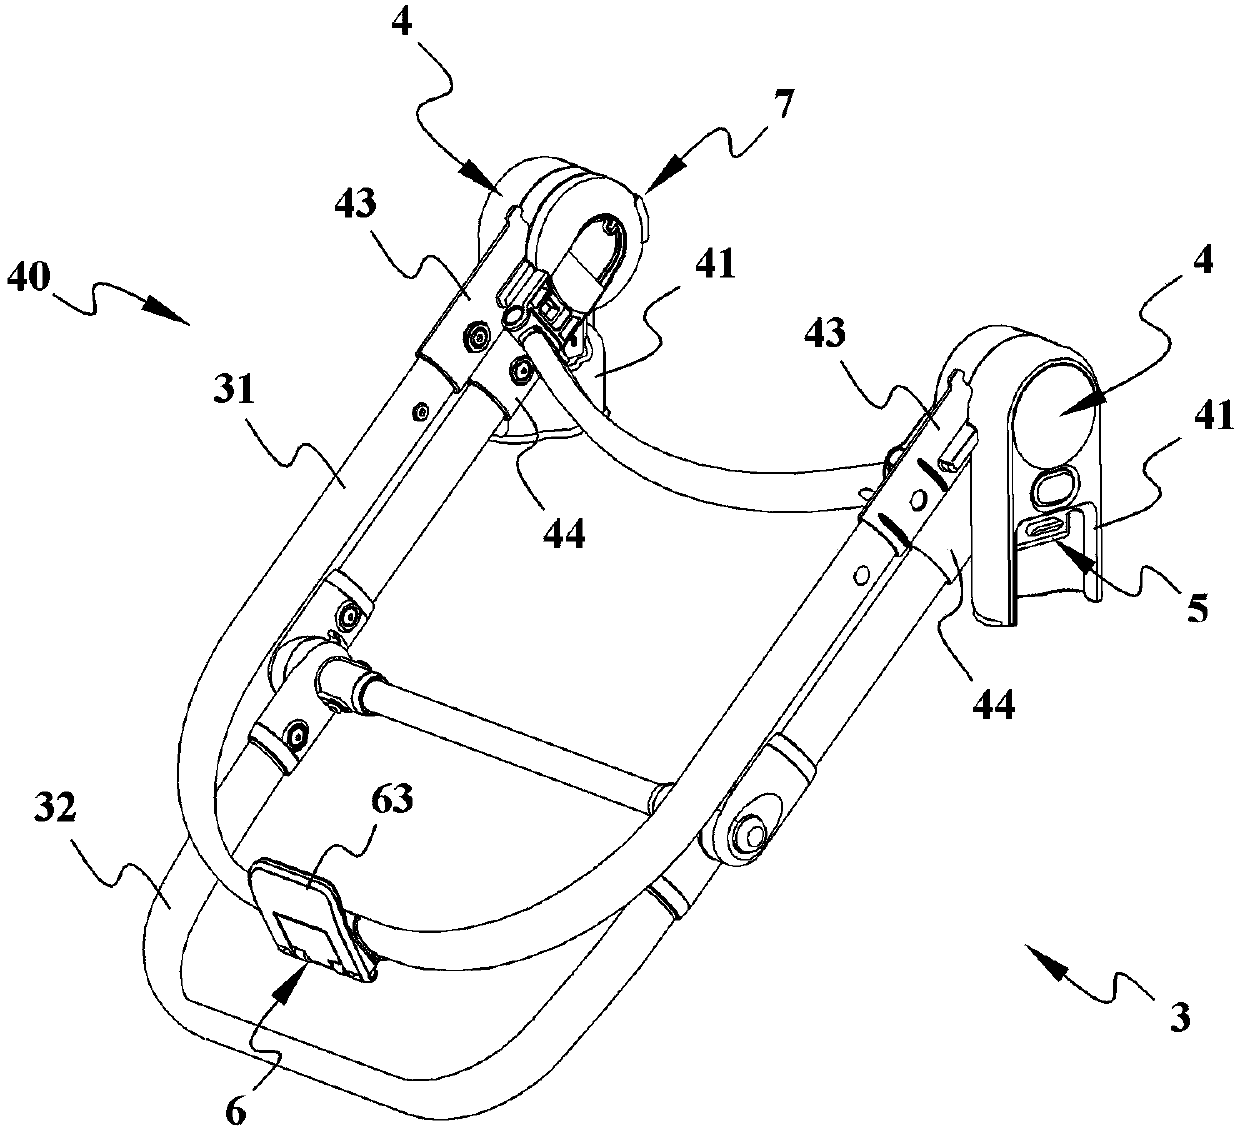 Splicing seat folding mechanism of baby carriage